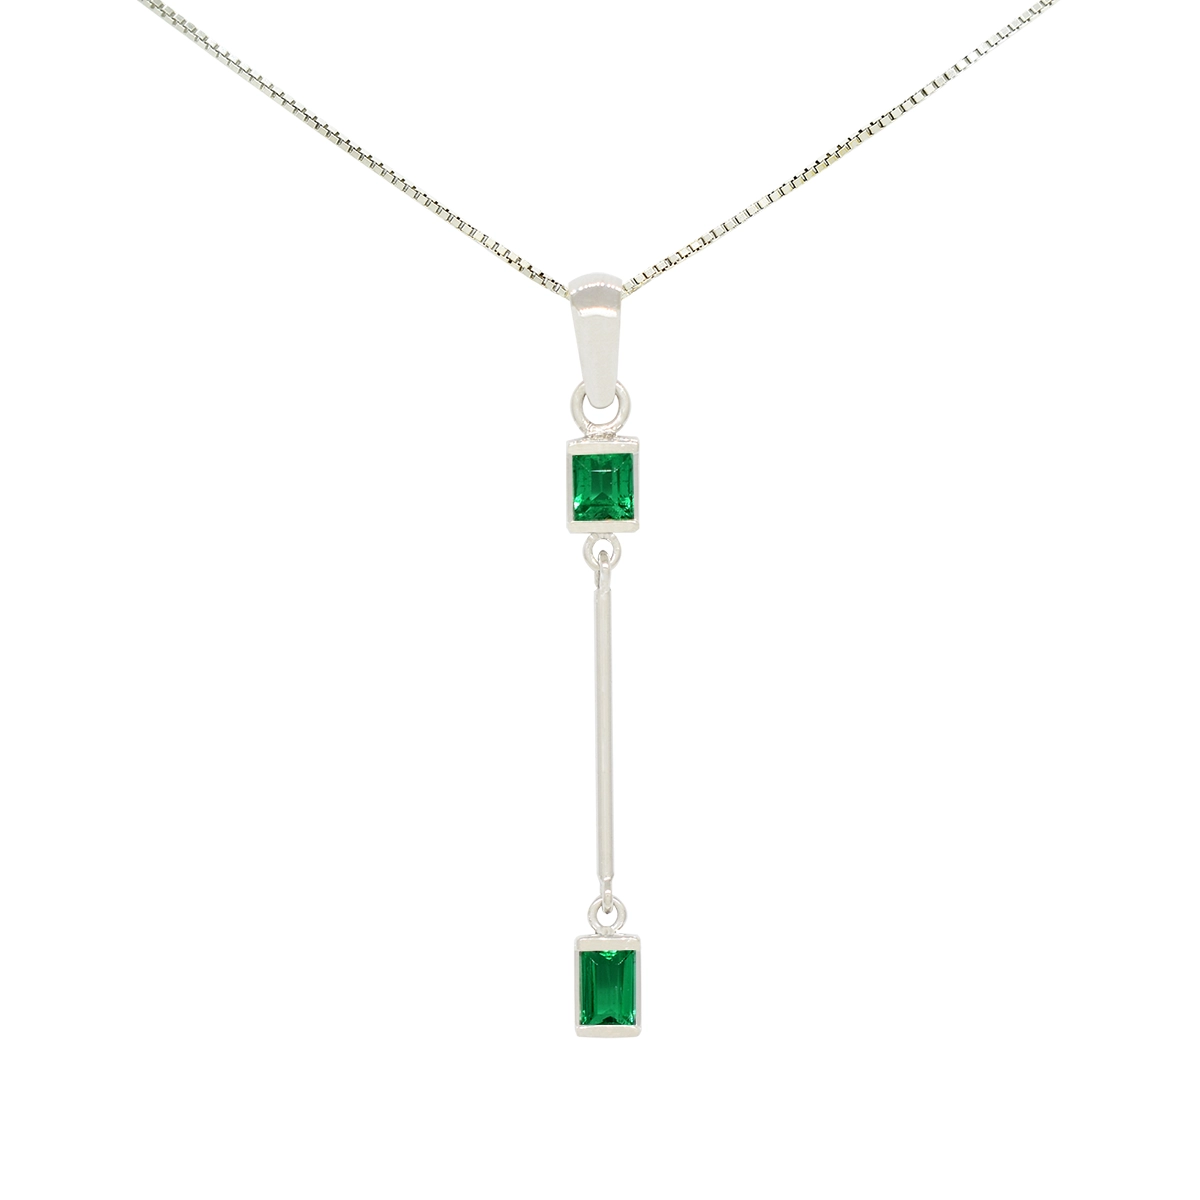 delicate-emerald-pendant-in-18k-white-gold-with-baguette-cut-emeralds